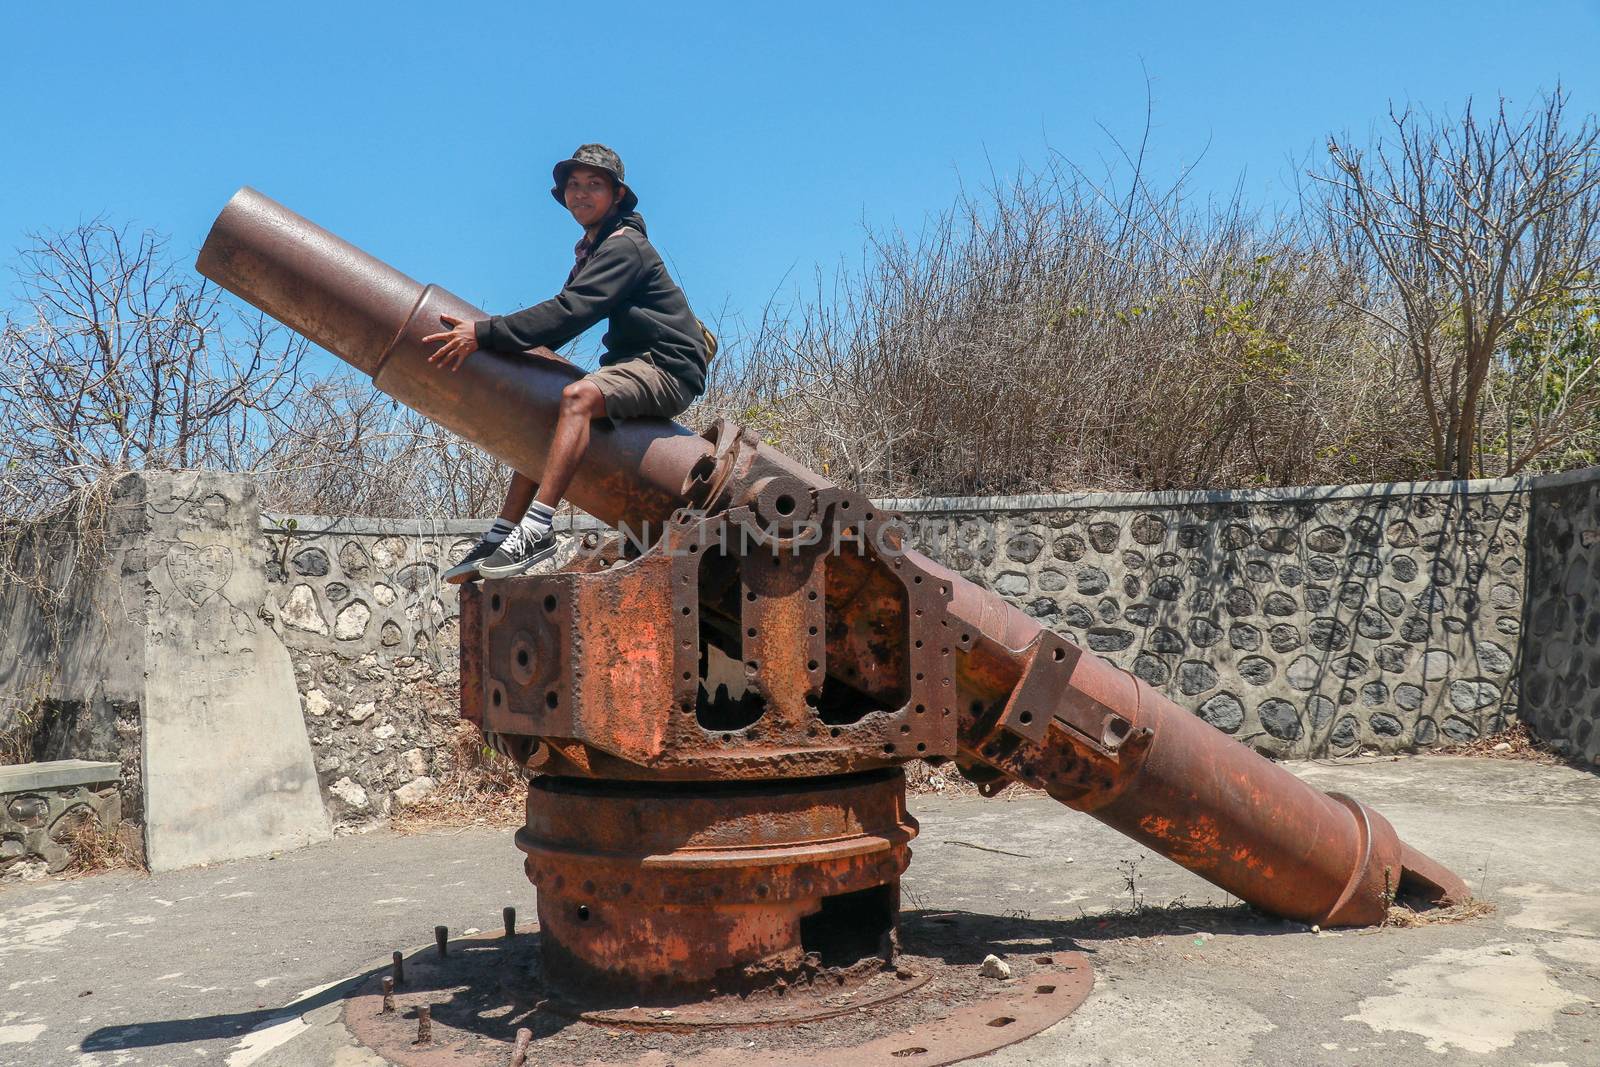 An Asian teenager sits on a historic World War II cannon. Military stone fortifications from World War II. A young guy sitting on an ancient cannon. Lombok, Indonesia.